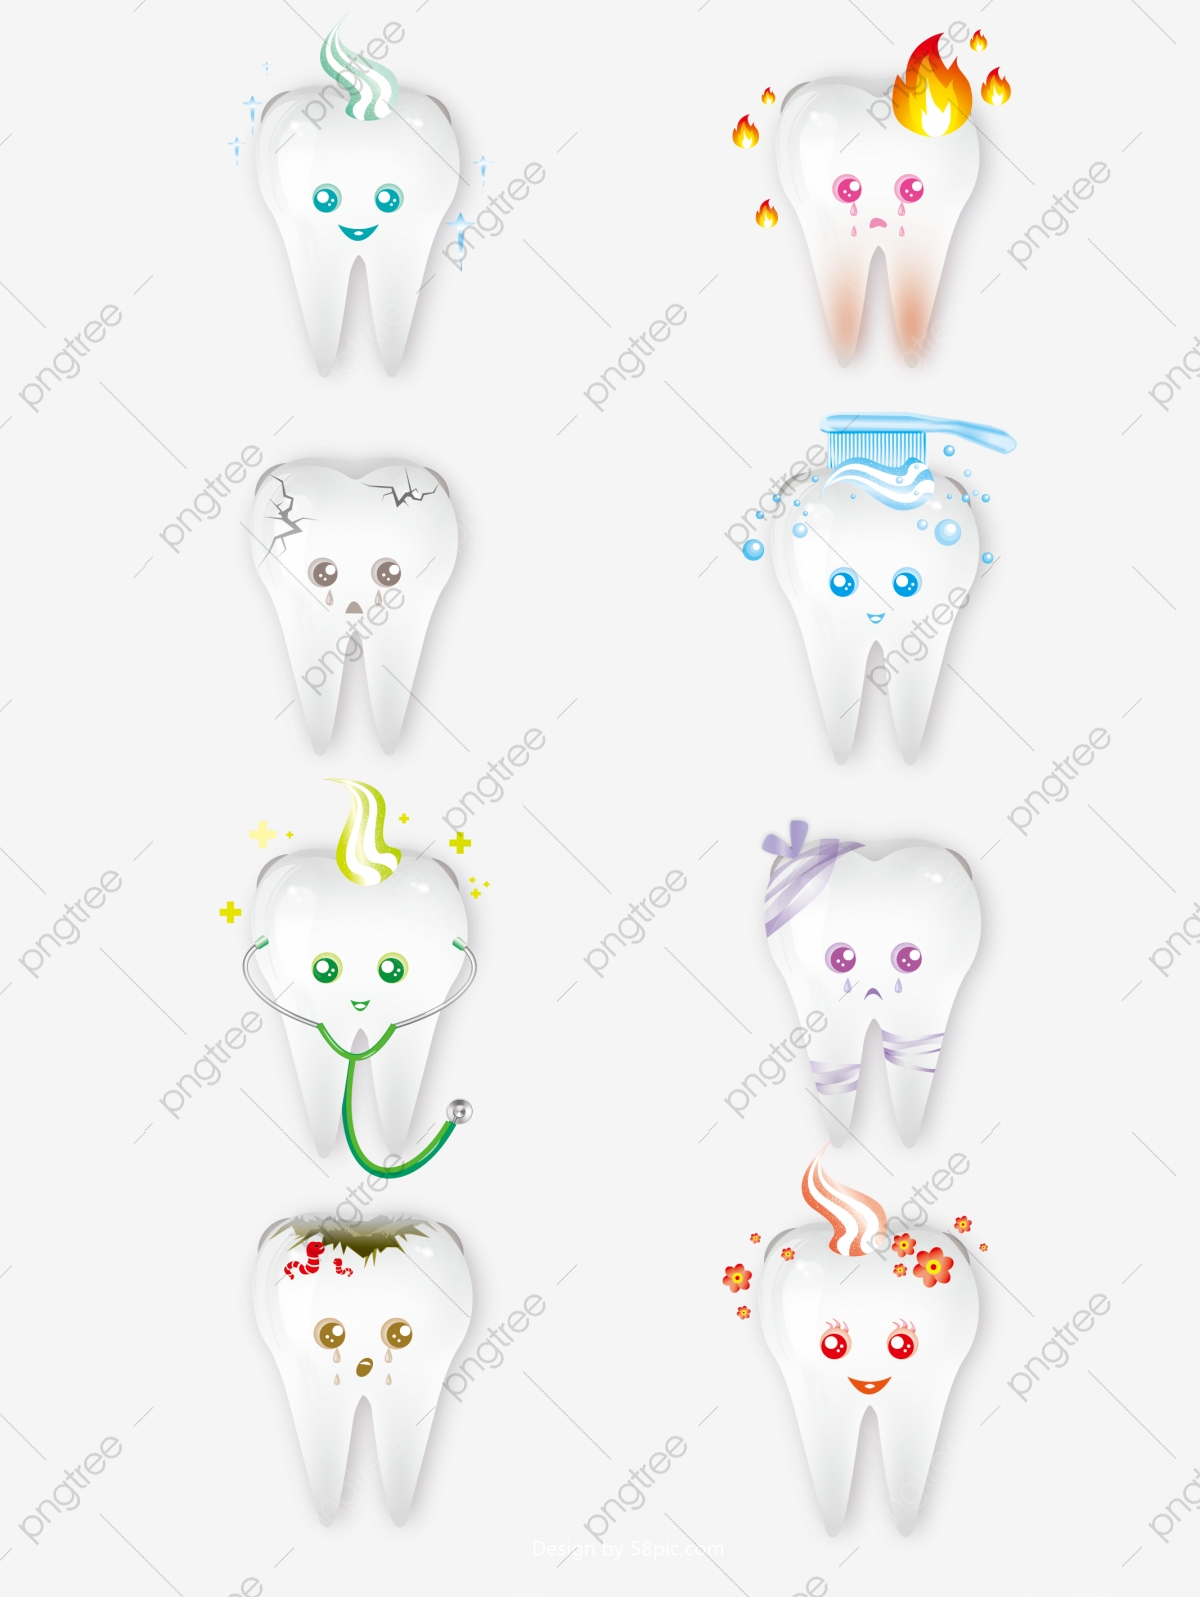 Dental Oral Health Image, Health Clipart, Dental Care, Tooth PNG.